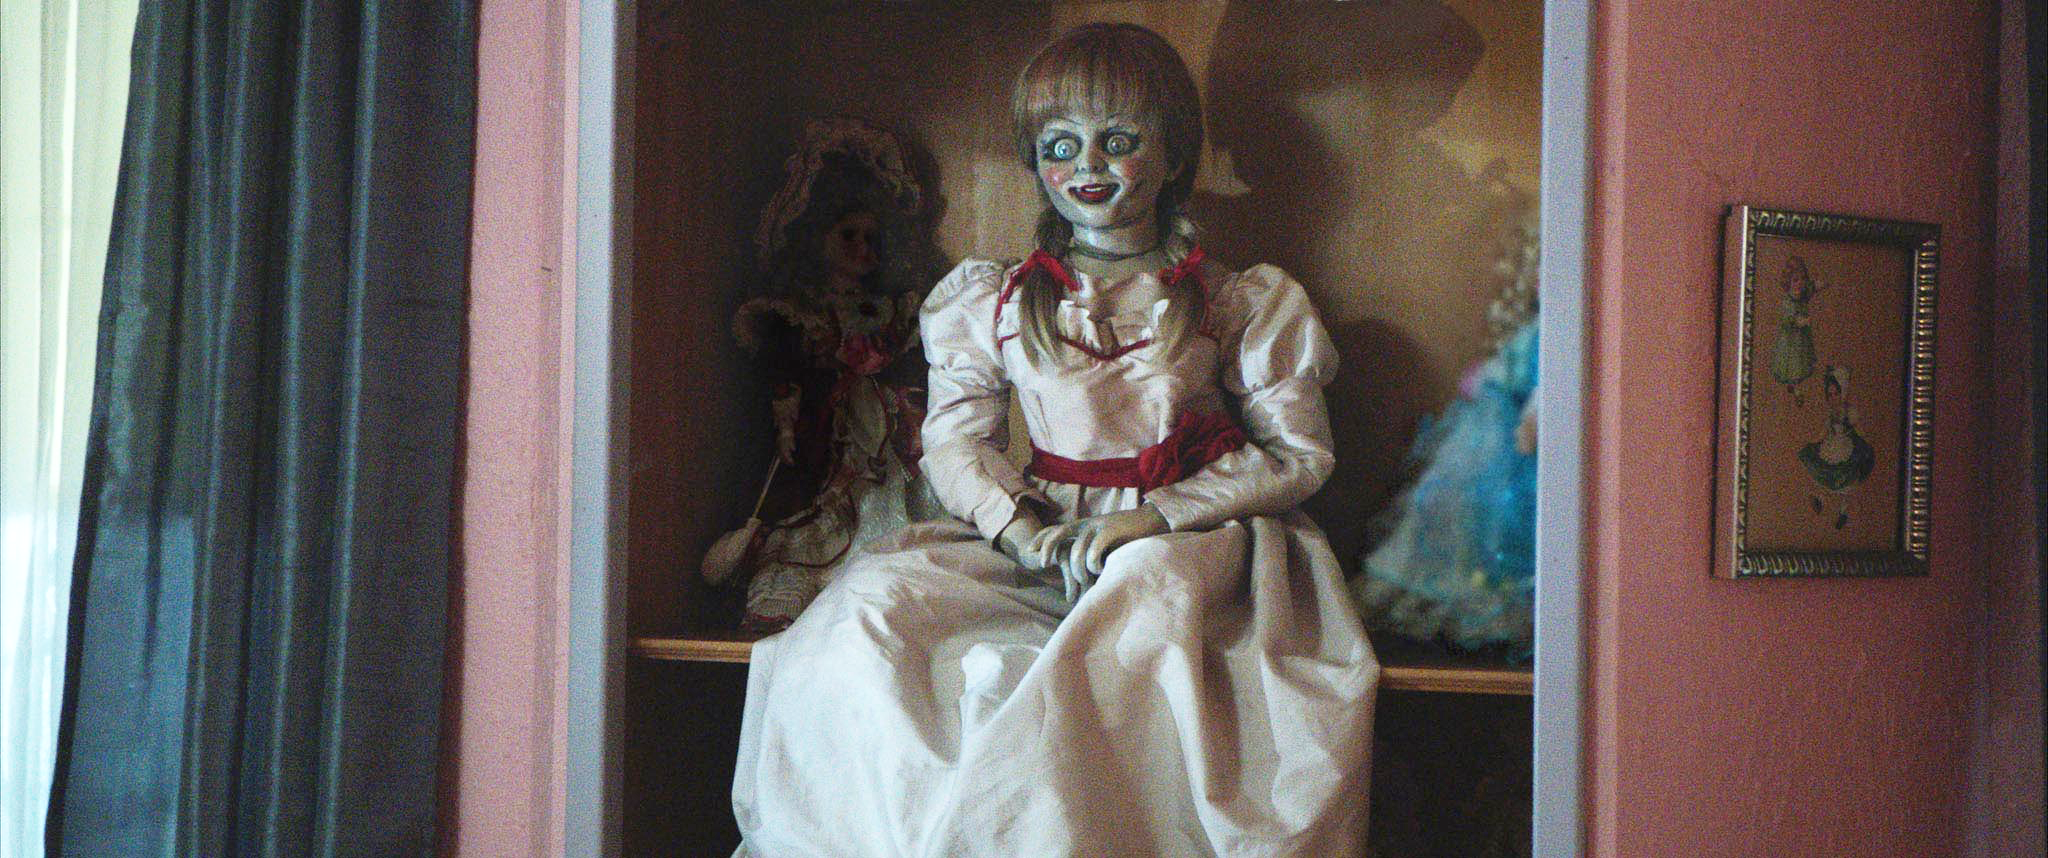 scary looking dolls